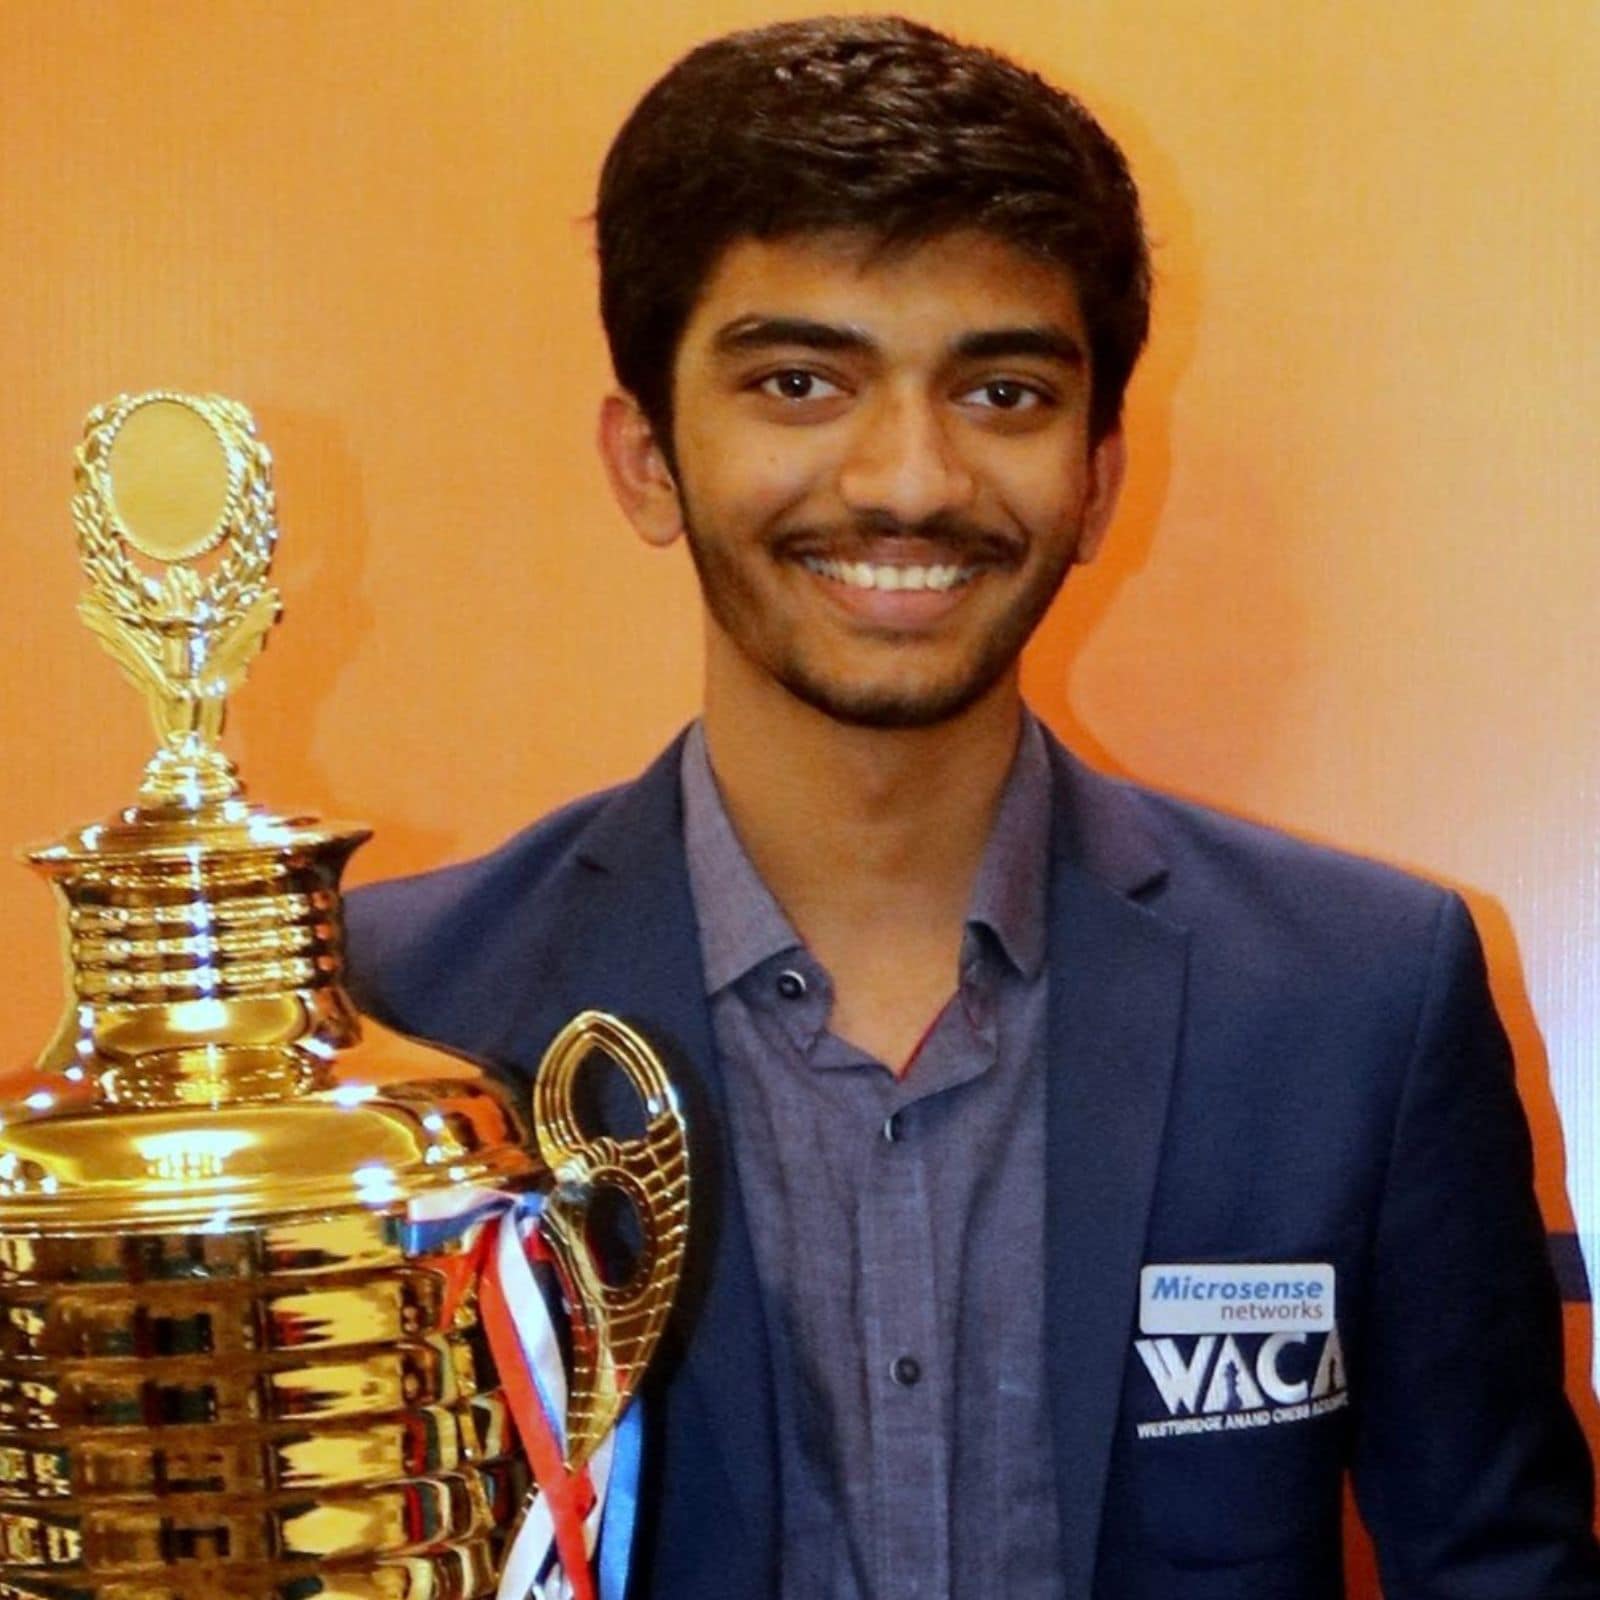 Indian Teenager Donnarumma Gukesh Becomes the Youngest to Beat